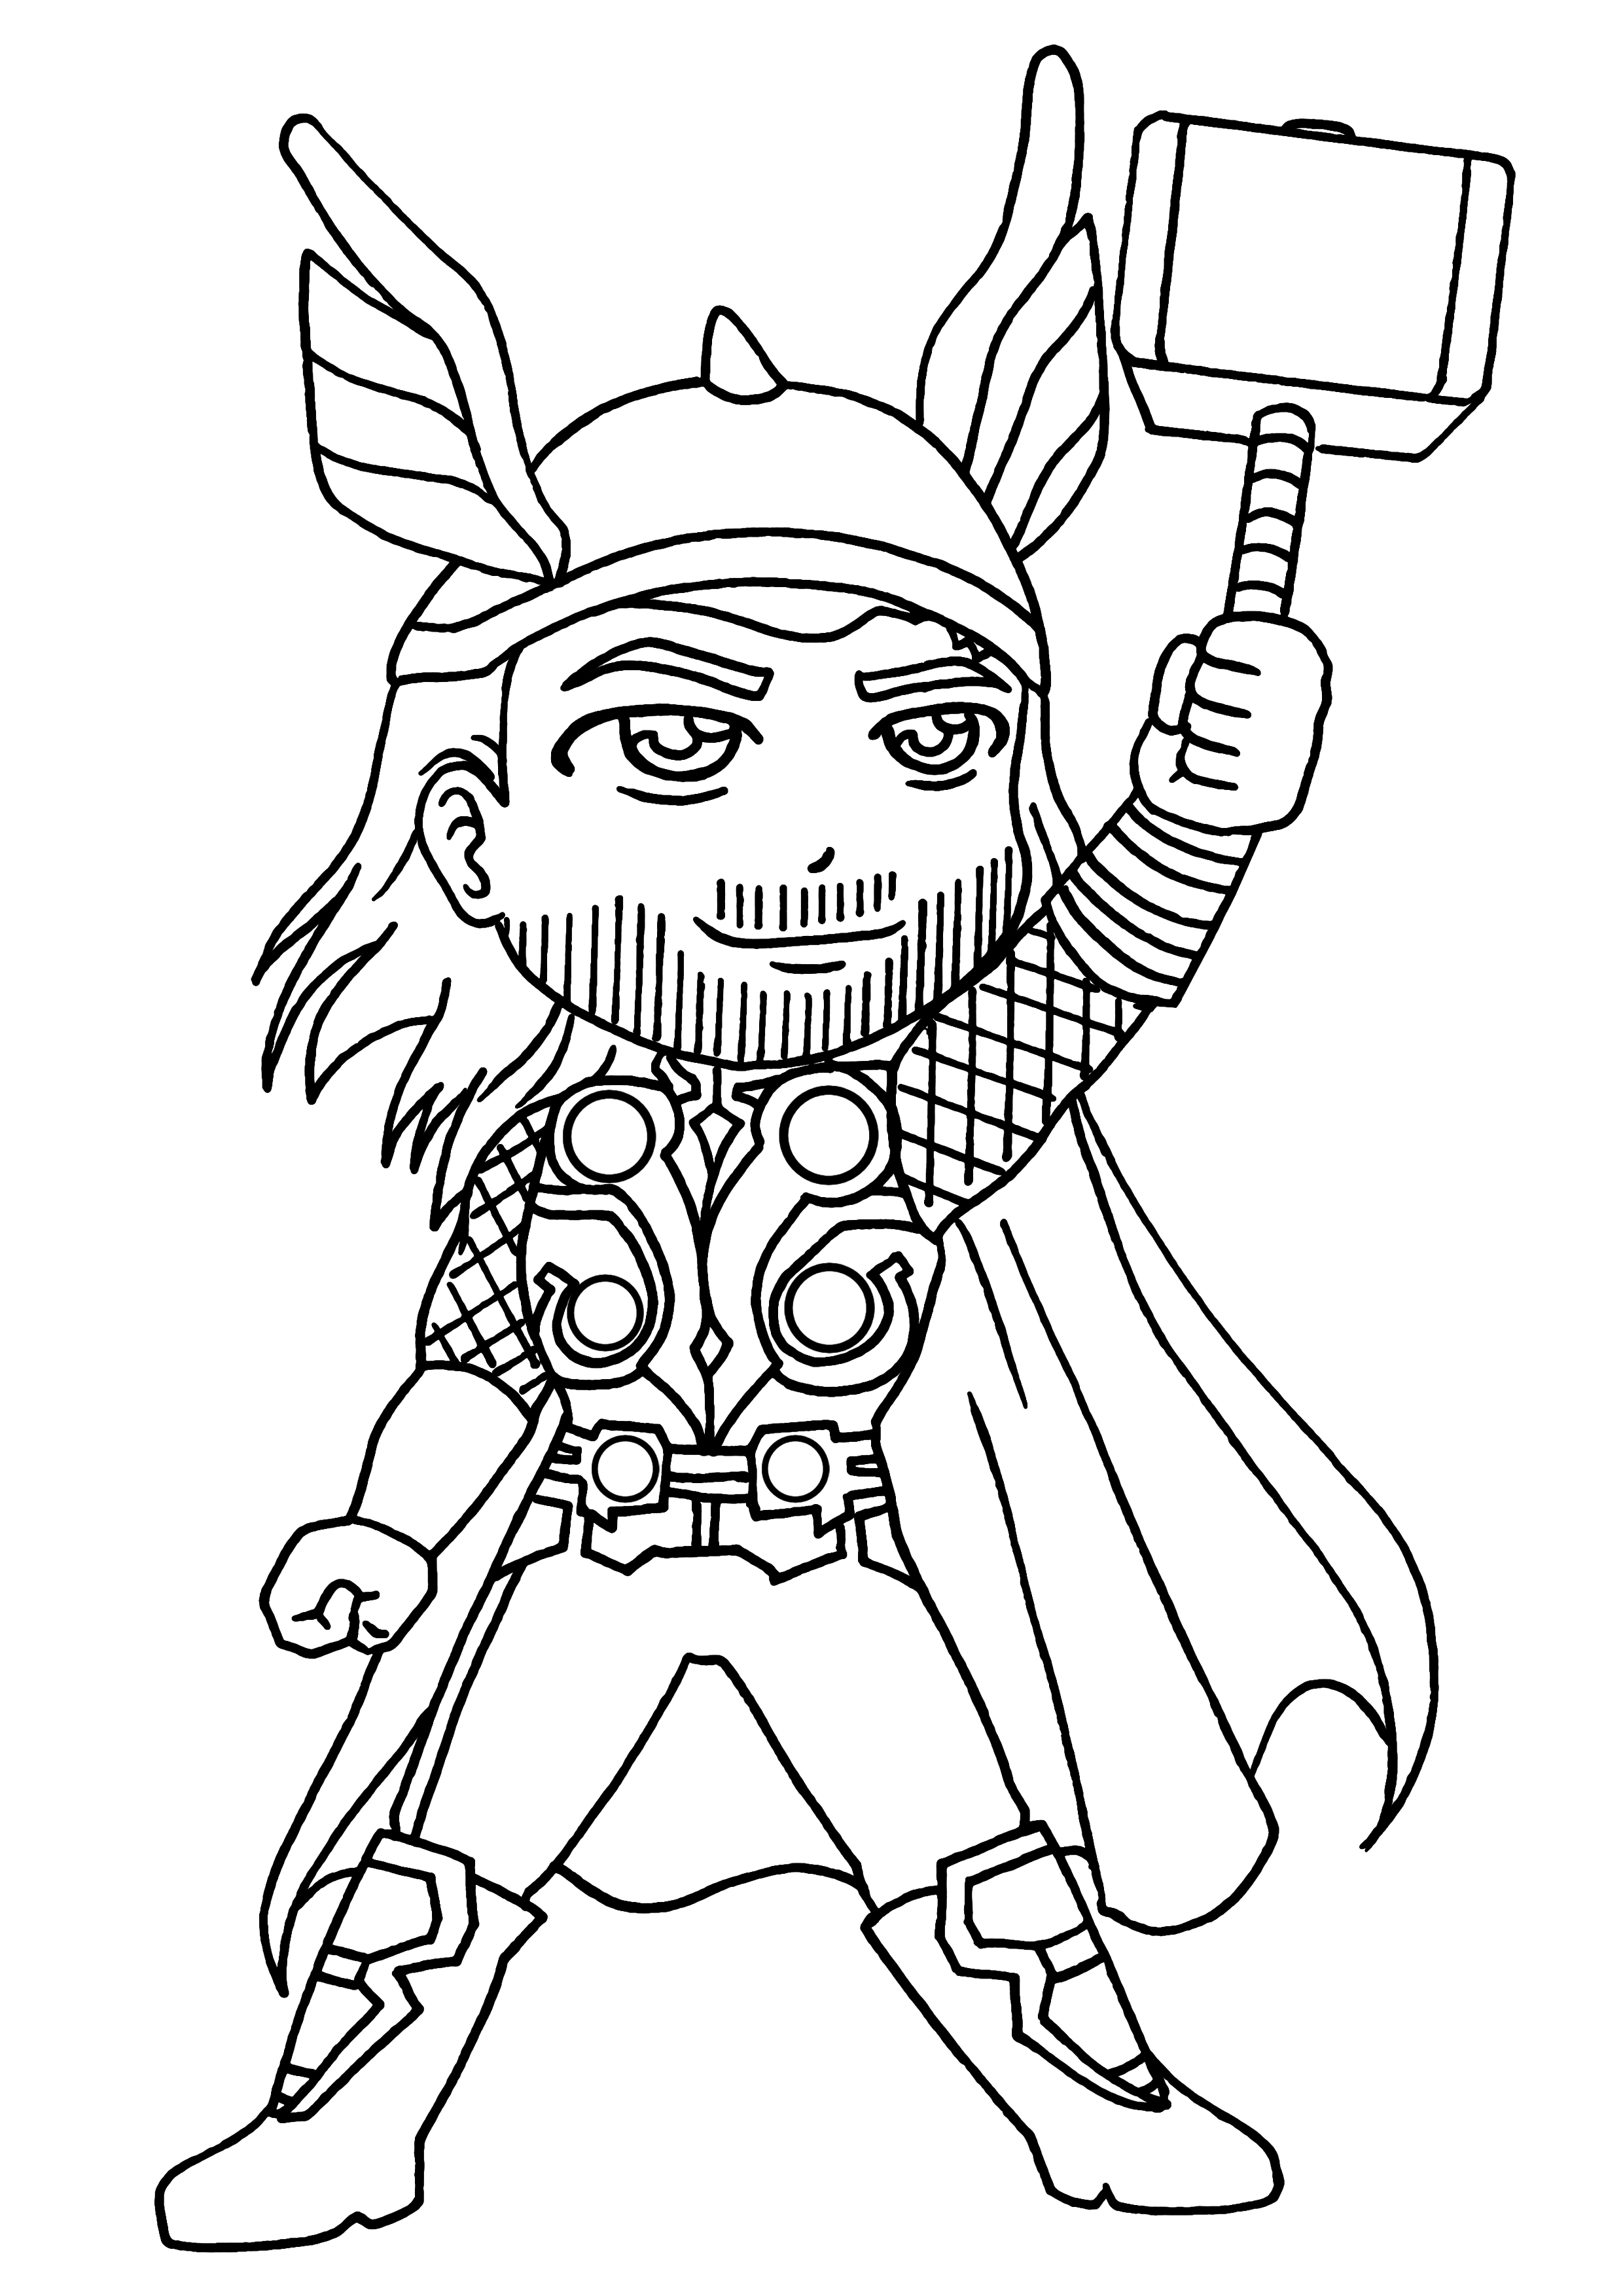 coloring-pages-thor-superheroes-printable-coloring-pages